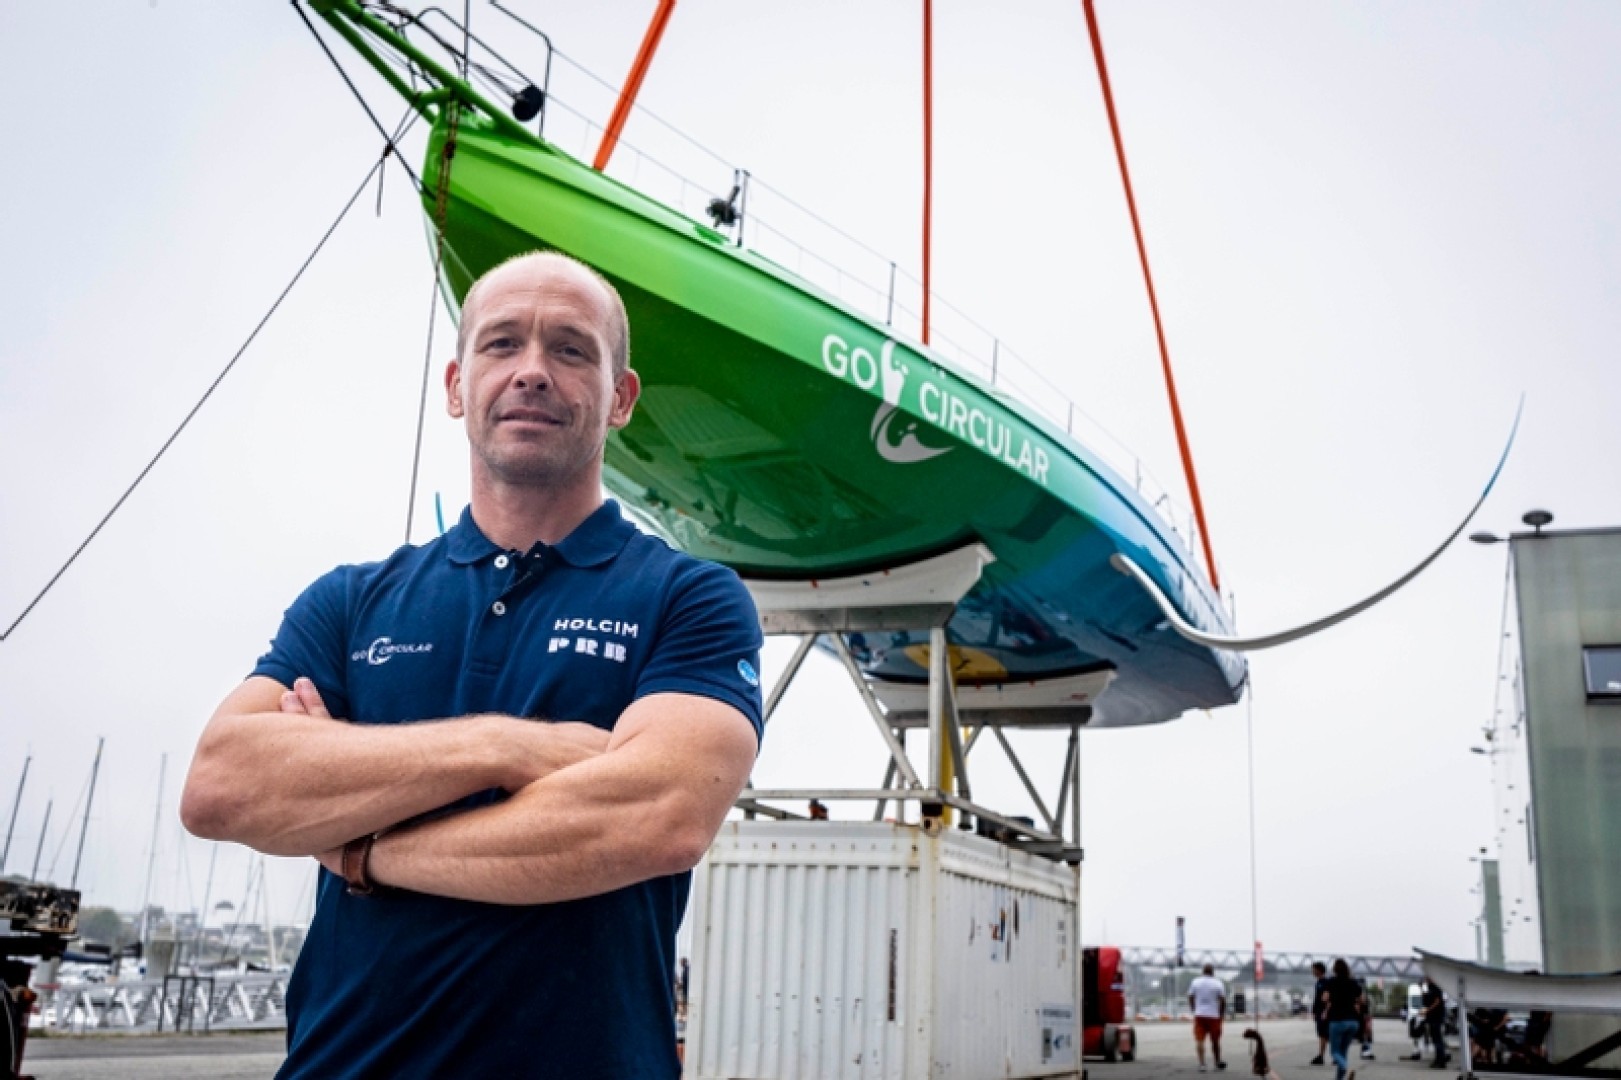 Holcim - PRB confirm new Imoca entry in The Ocean Race